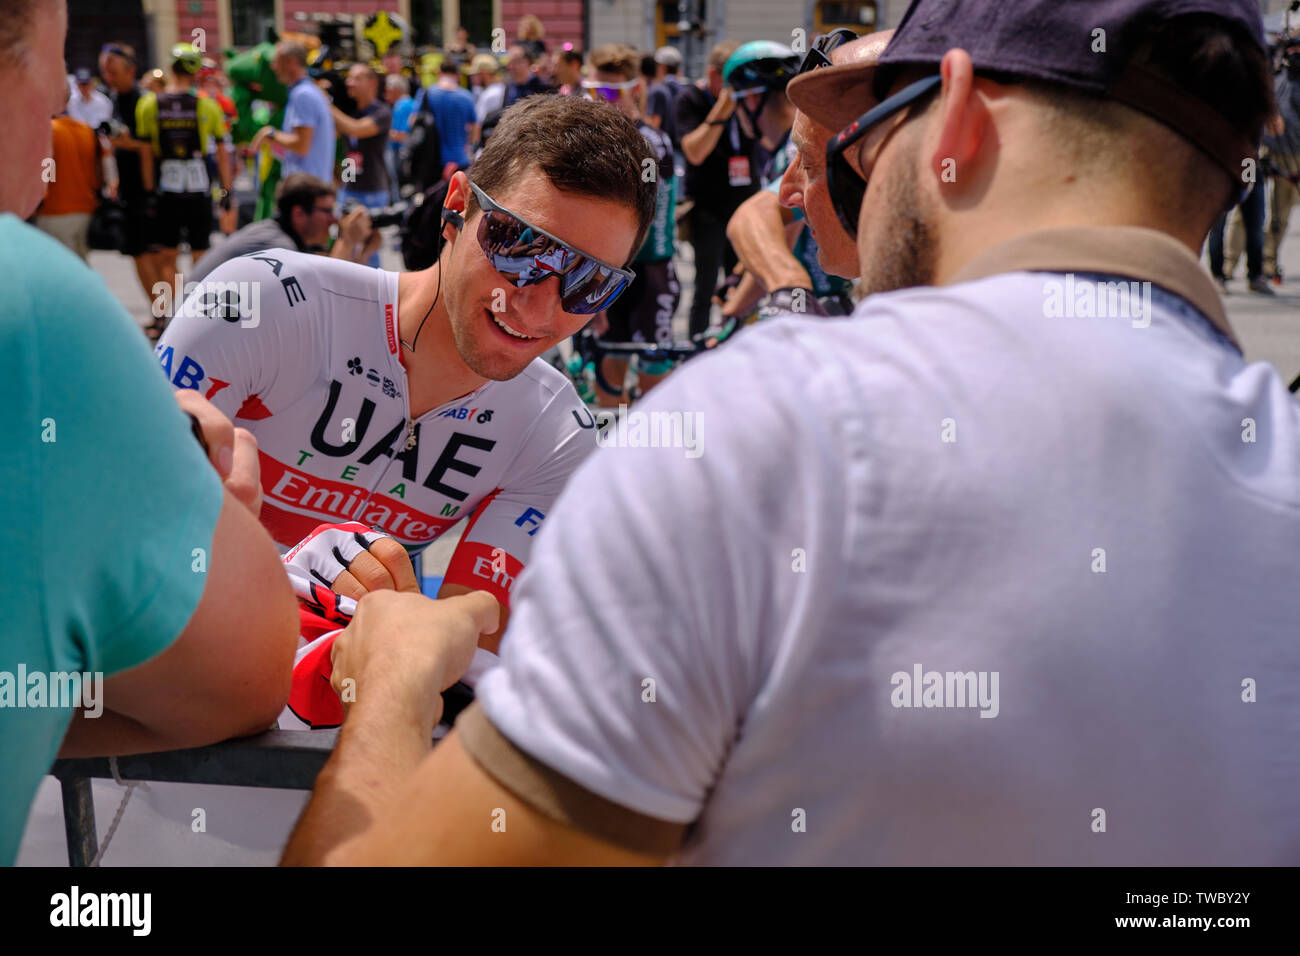 Jan Polanc of Team UAE Emirates signing jersey of local fan at departure of Tour of Slovenia stage one race, Ljubljana, Slovenia - June 19, 2019 Stock Photo